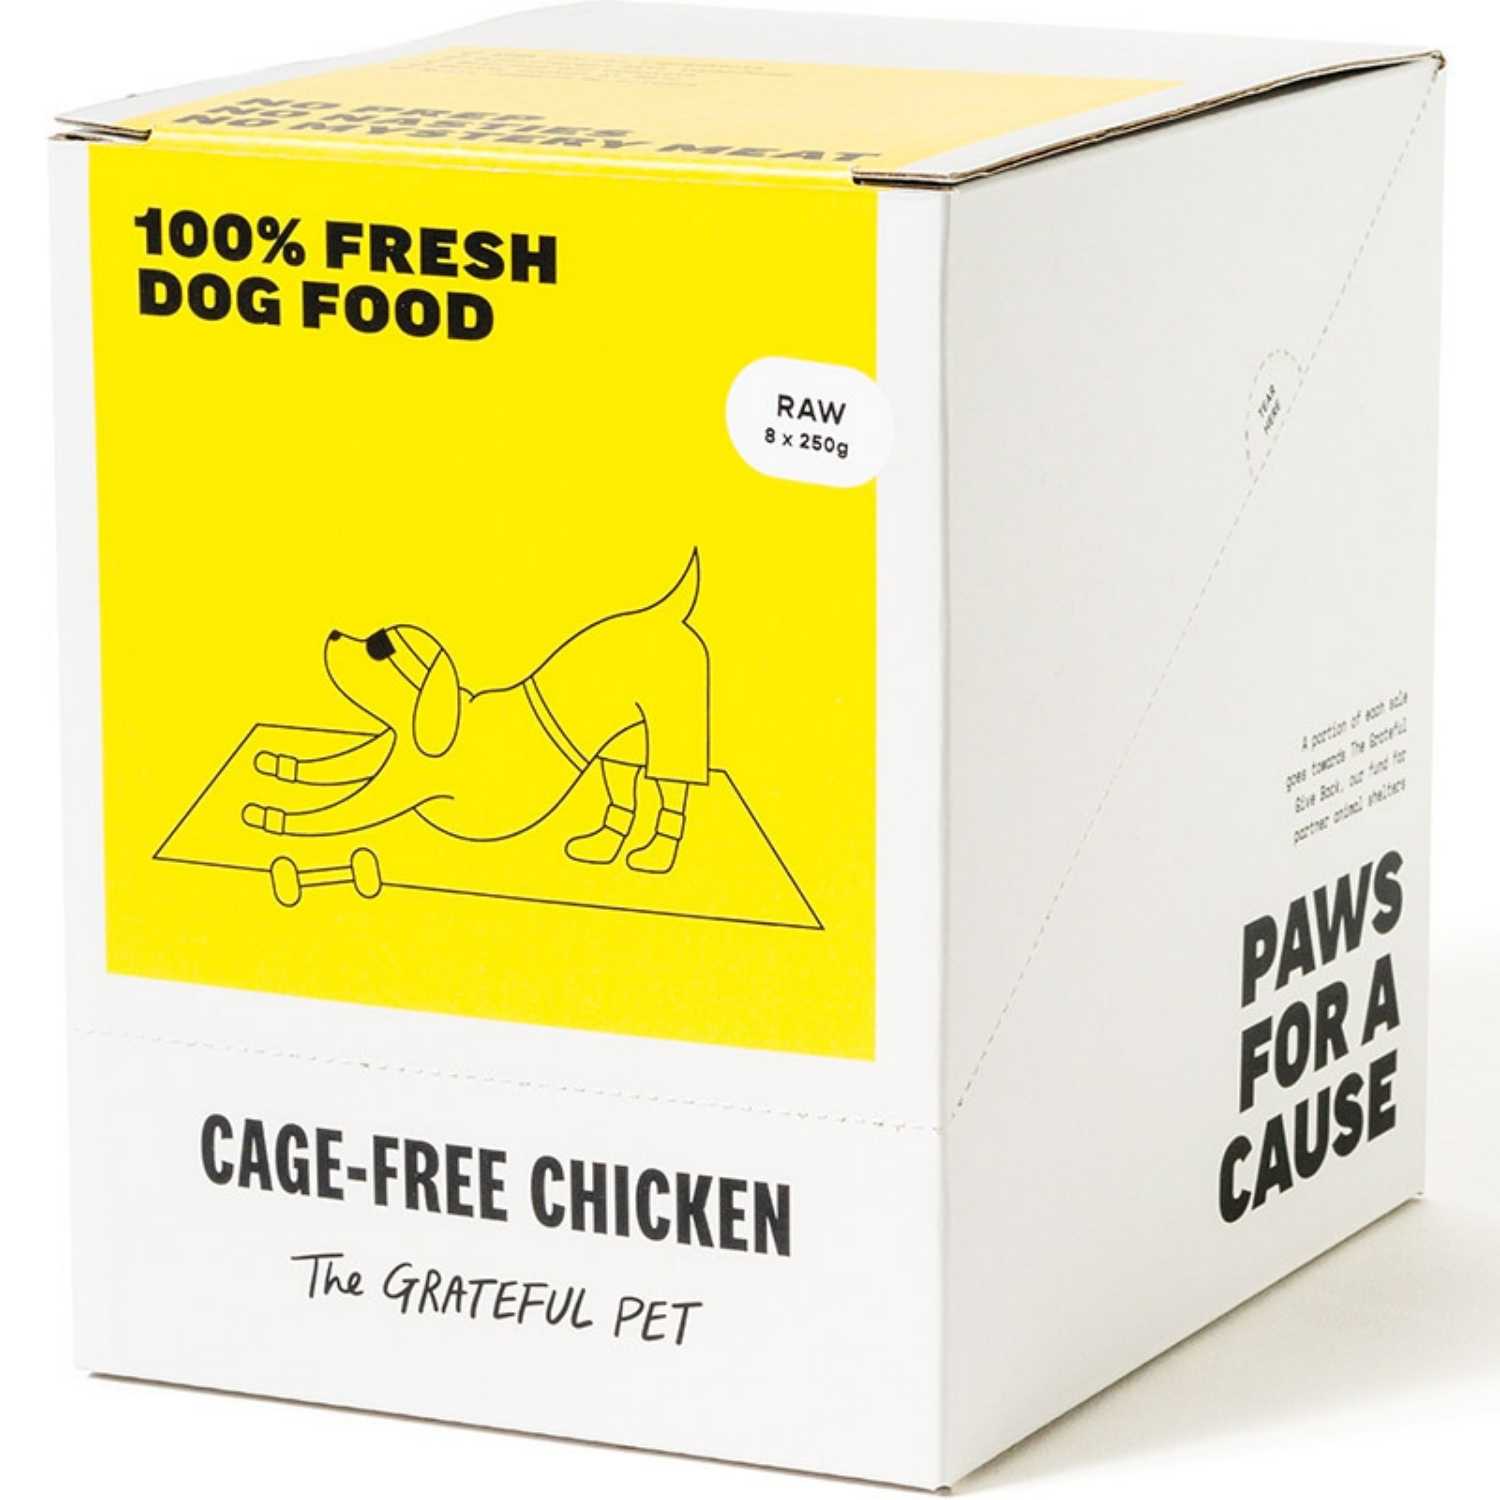 The Grateful Pet - Raw (Cage-Free Chicken) - Dog (8 x 250g Pouch) Food (Case)